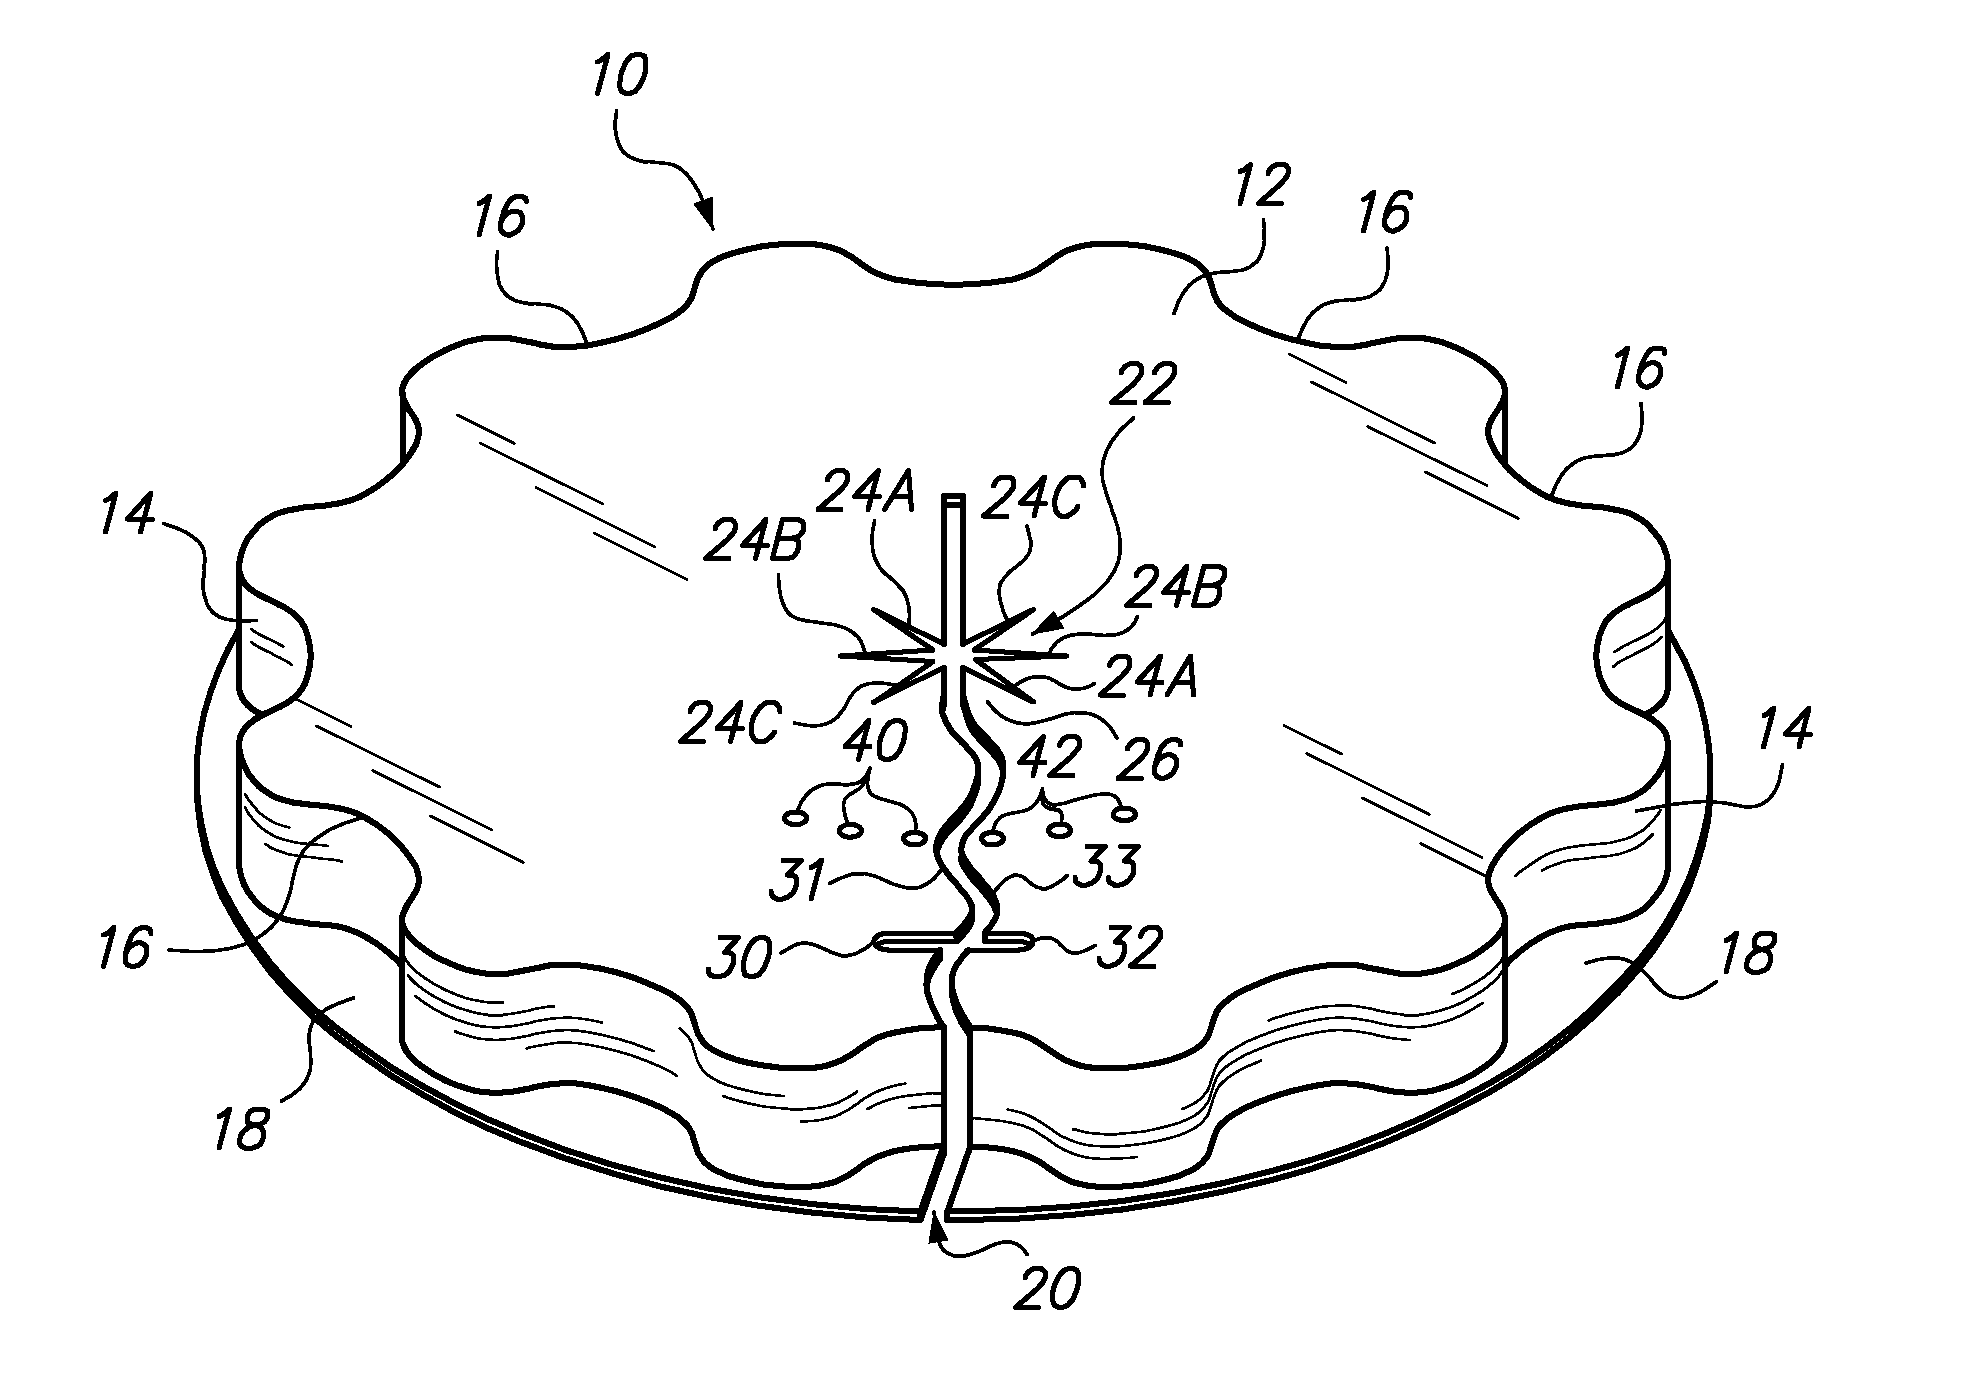 Water retention device for an individual plant container